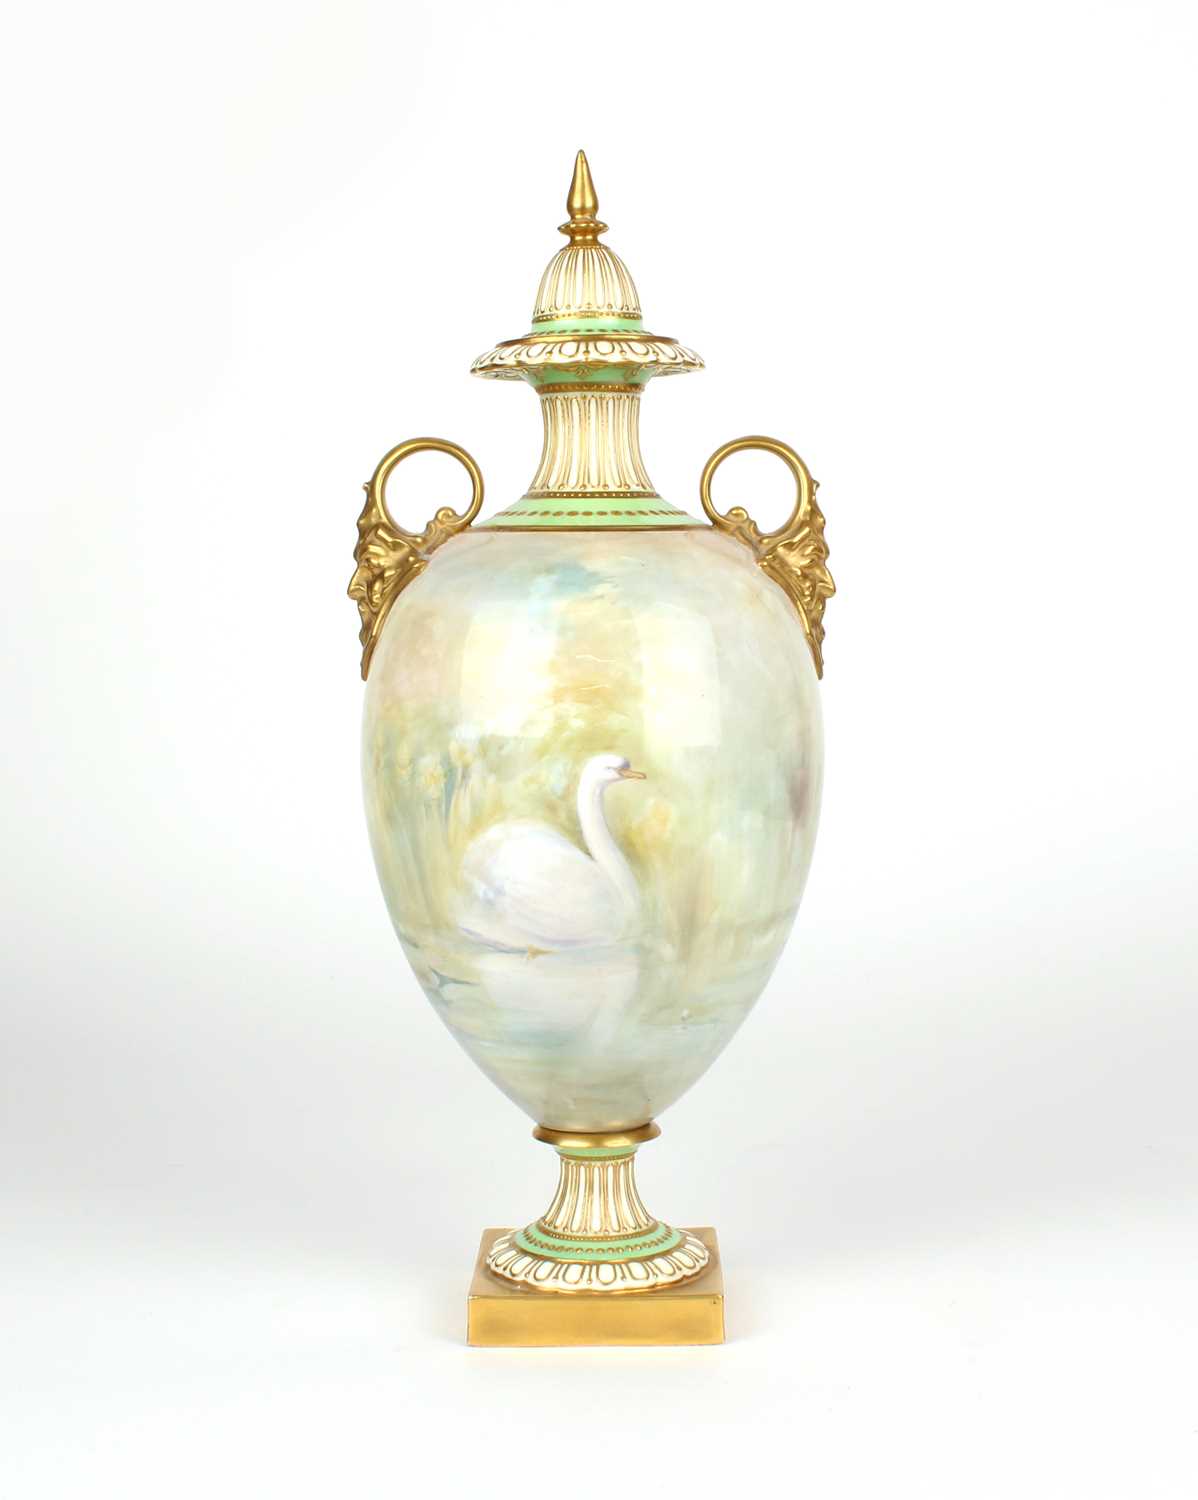 George White for Royal Doulton "Leda and the Swan" Urn - Image 5 of 20